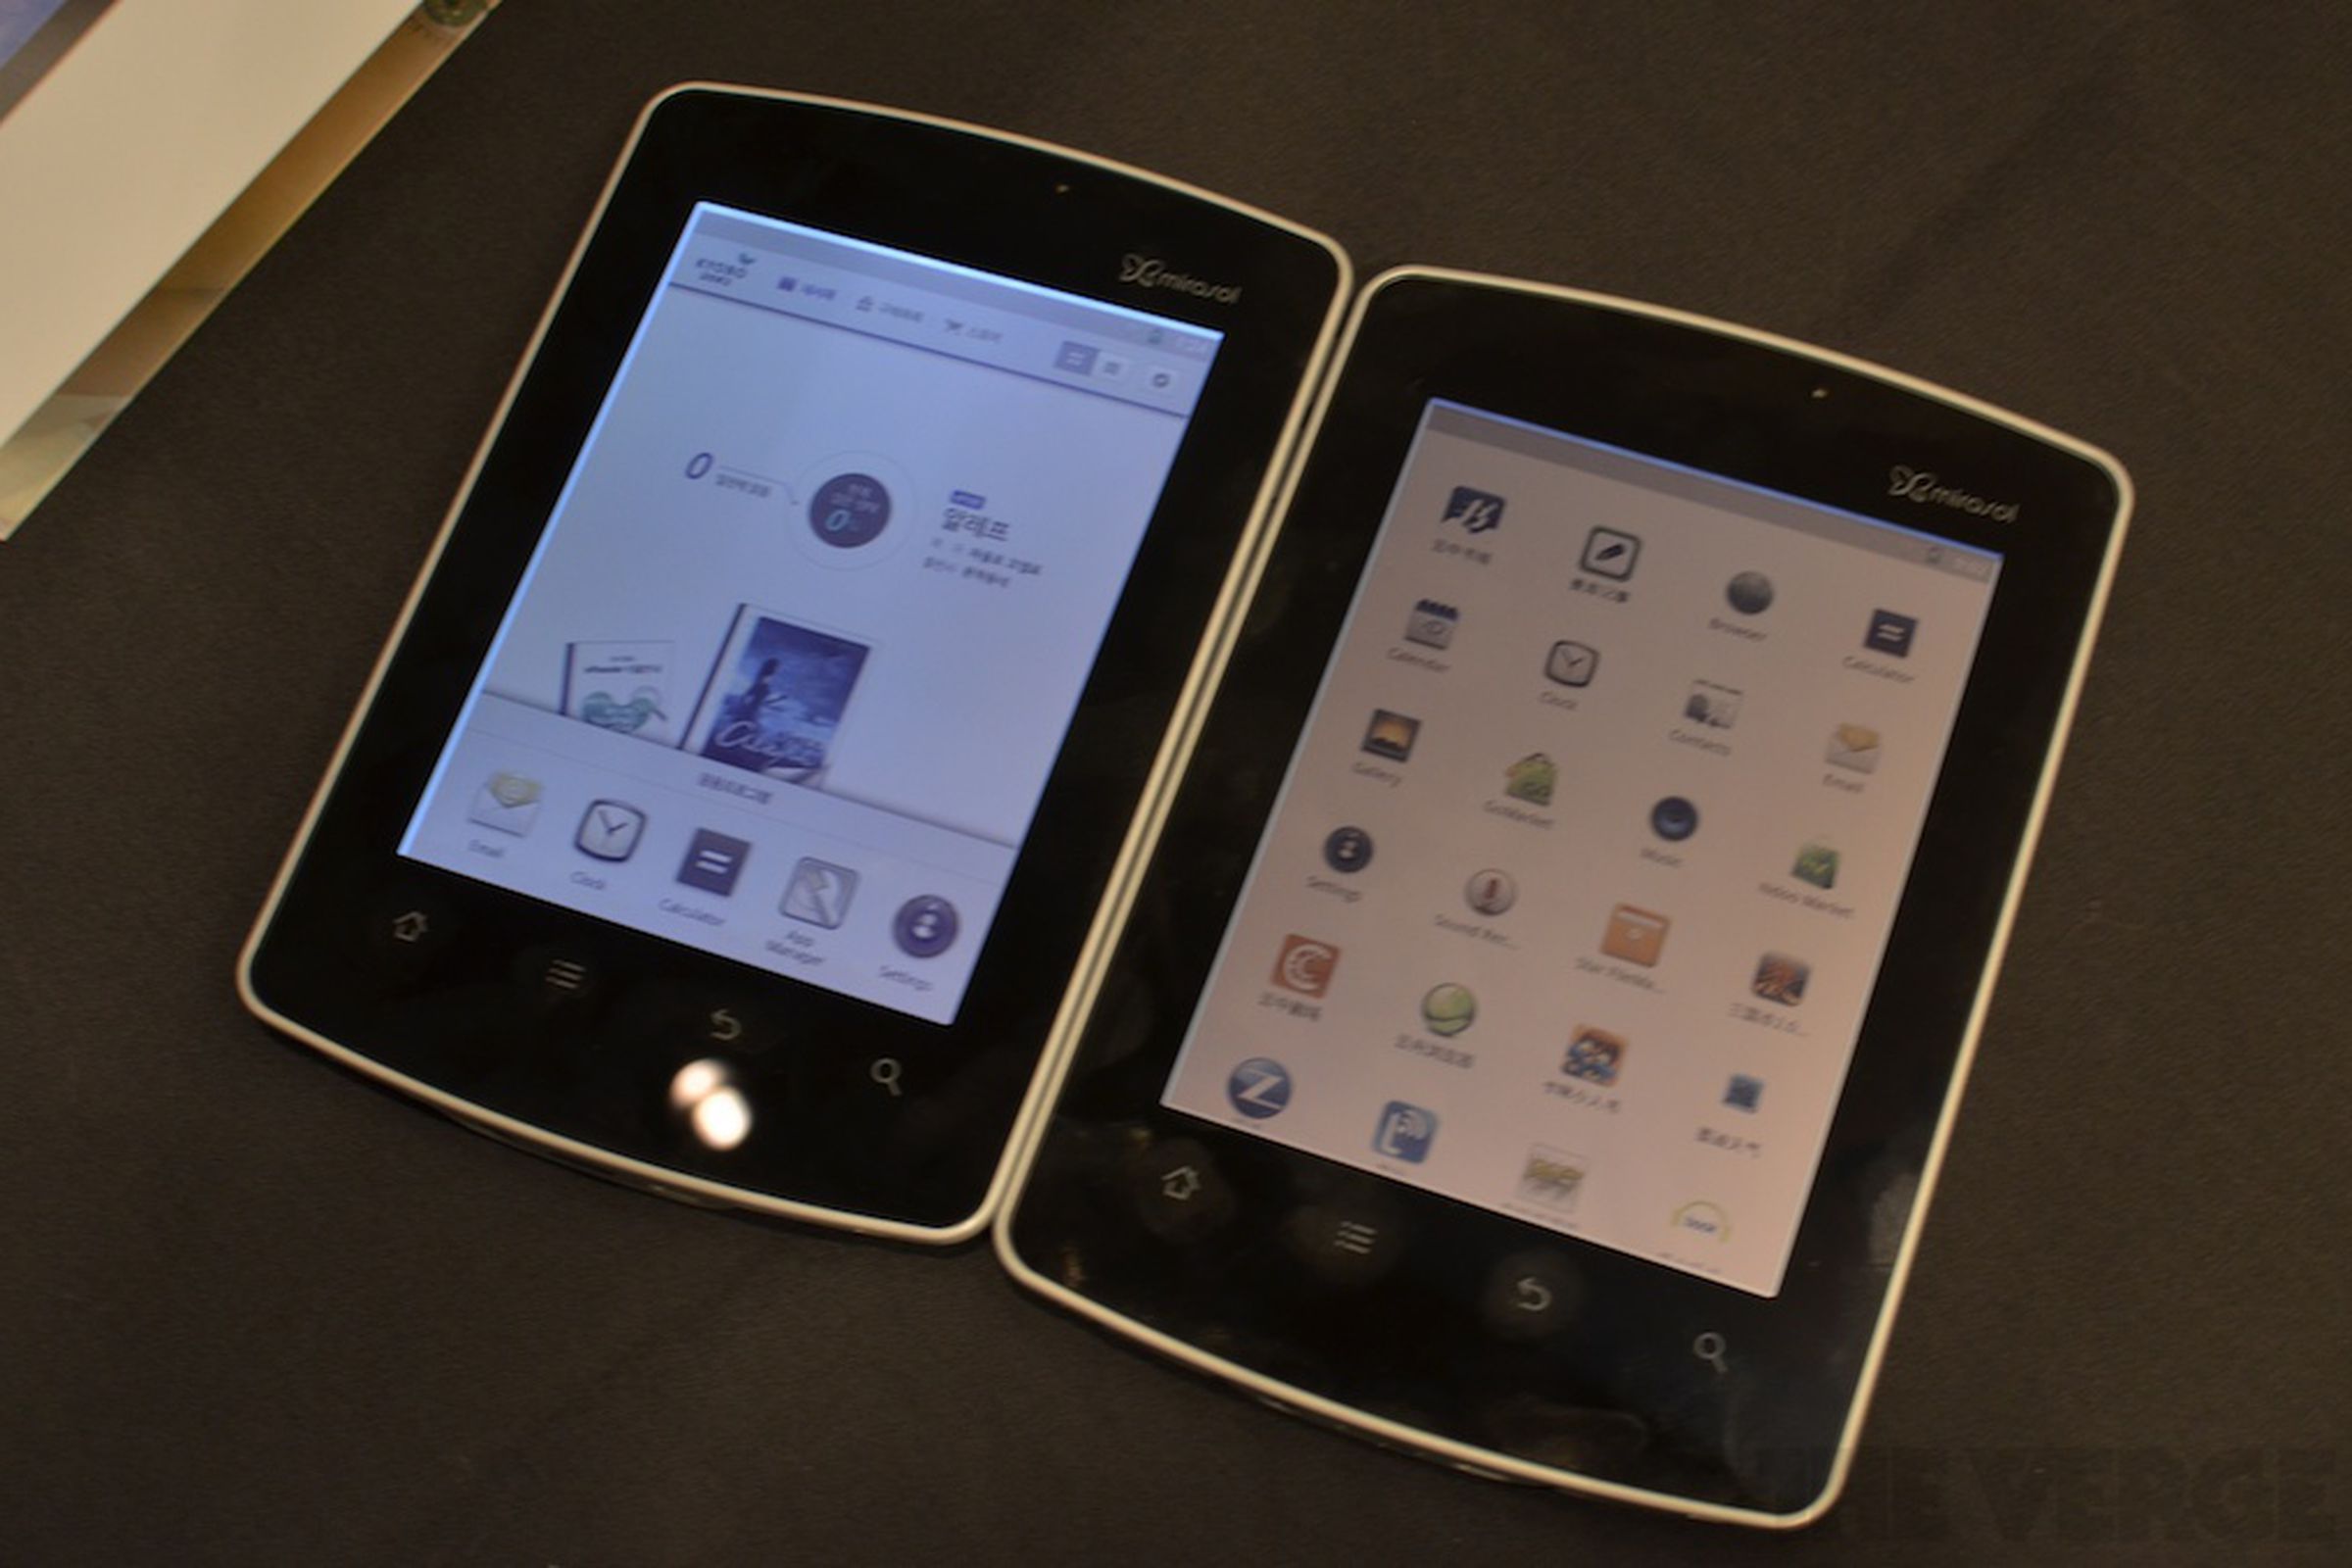 Gallery Photo: Bambook and Kyobo e-reader hands on pictures